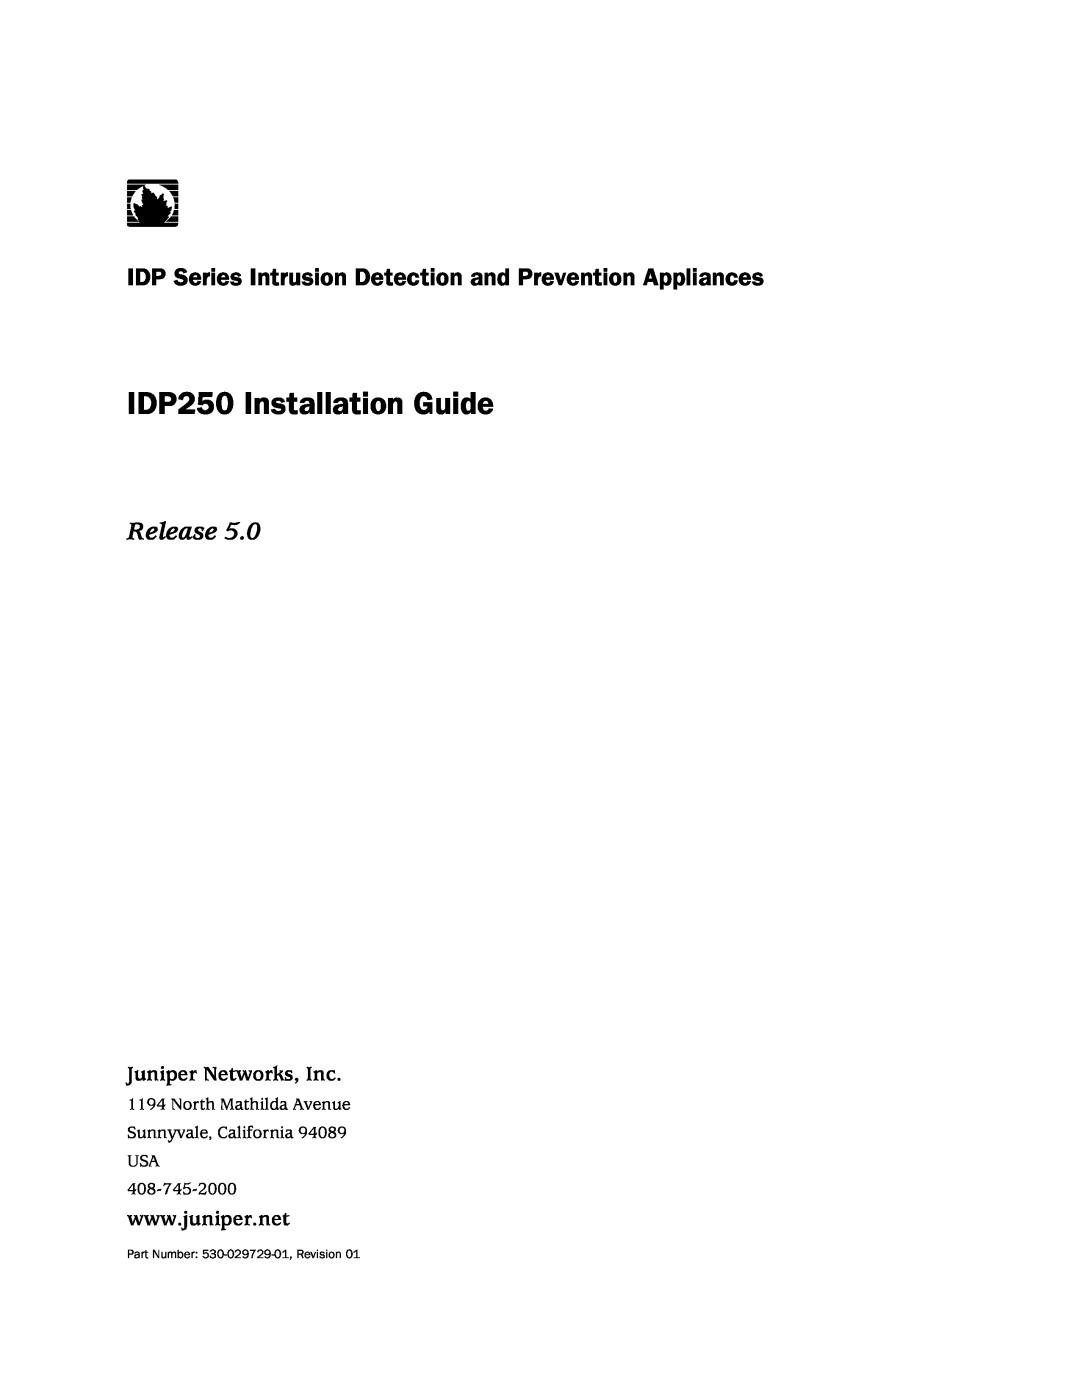 Juniper Networks IDP8200, IDP250 manual Juniper Networks, Intrusion Detection and Prevention, Releases 4.1r2a and April 